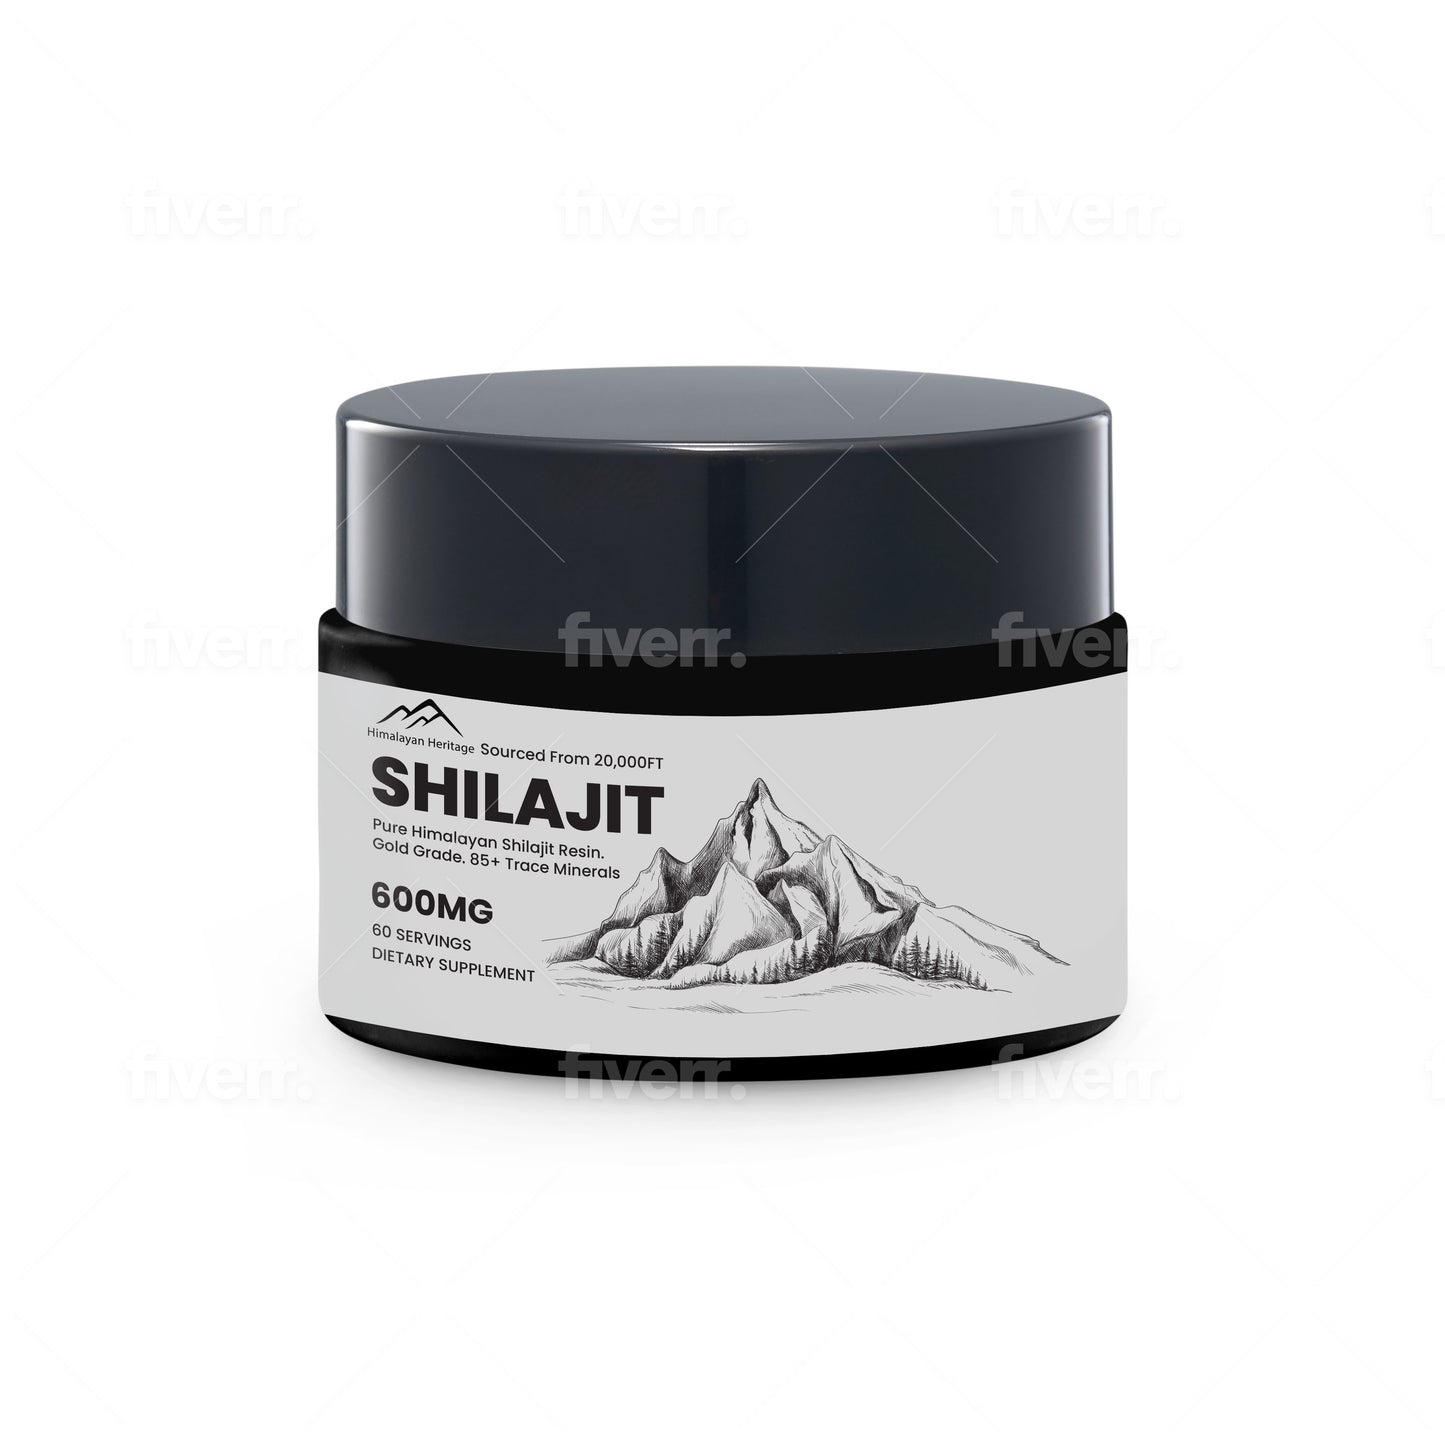 100% Pure Shilajit Resin - No Heavy Metals - 3rd Party Tested - 50 Gram 1.75oz